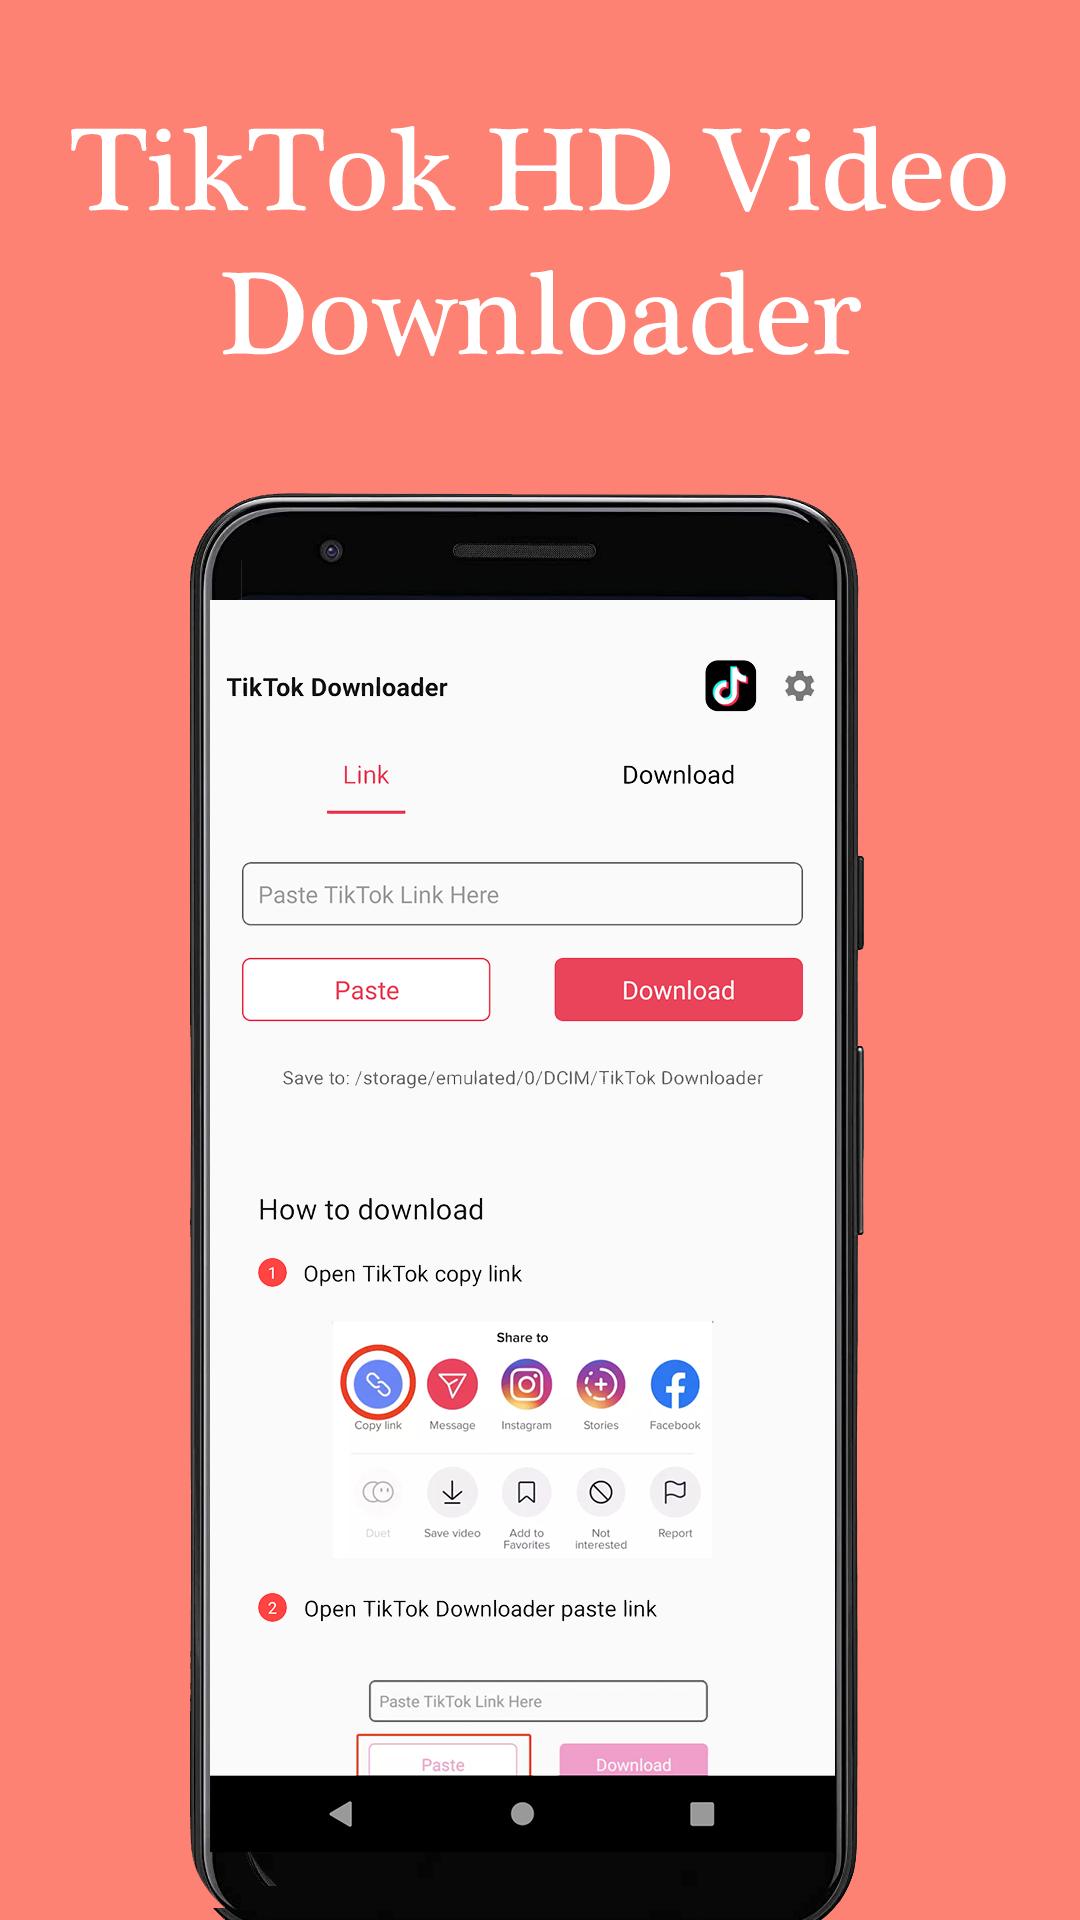 Video Downloader for TikTok - No Watermark for Android - APK Download